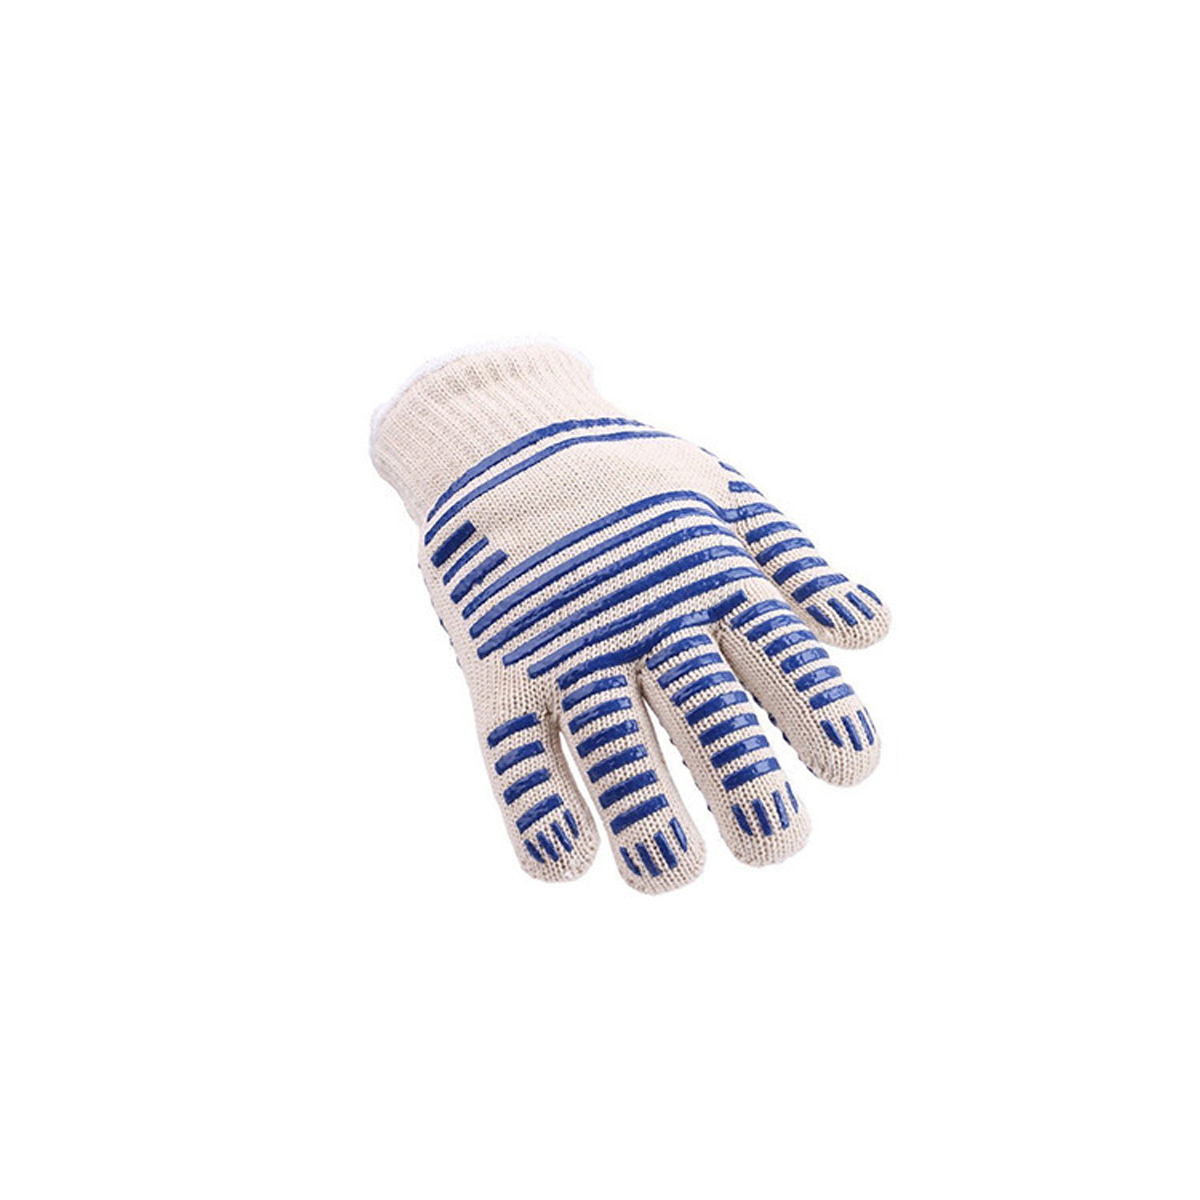 1PC-Extreme-Heat-Resistant-Kitchen-Oven-Mitts-Multi-Purpose-Barbecue-BBQ-Gloves-Anti-Cutting-Cooking-1651519-6